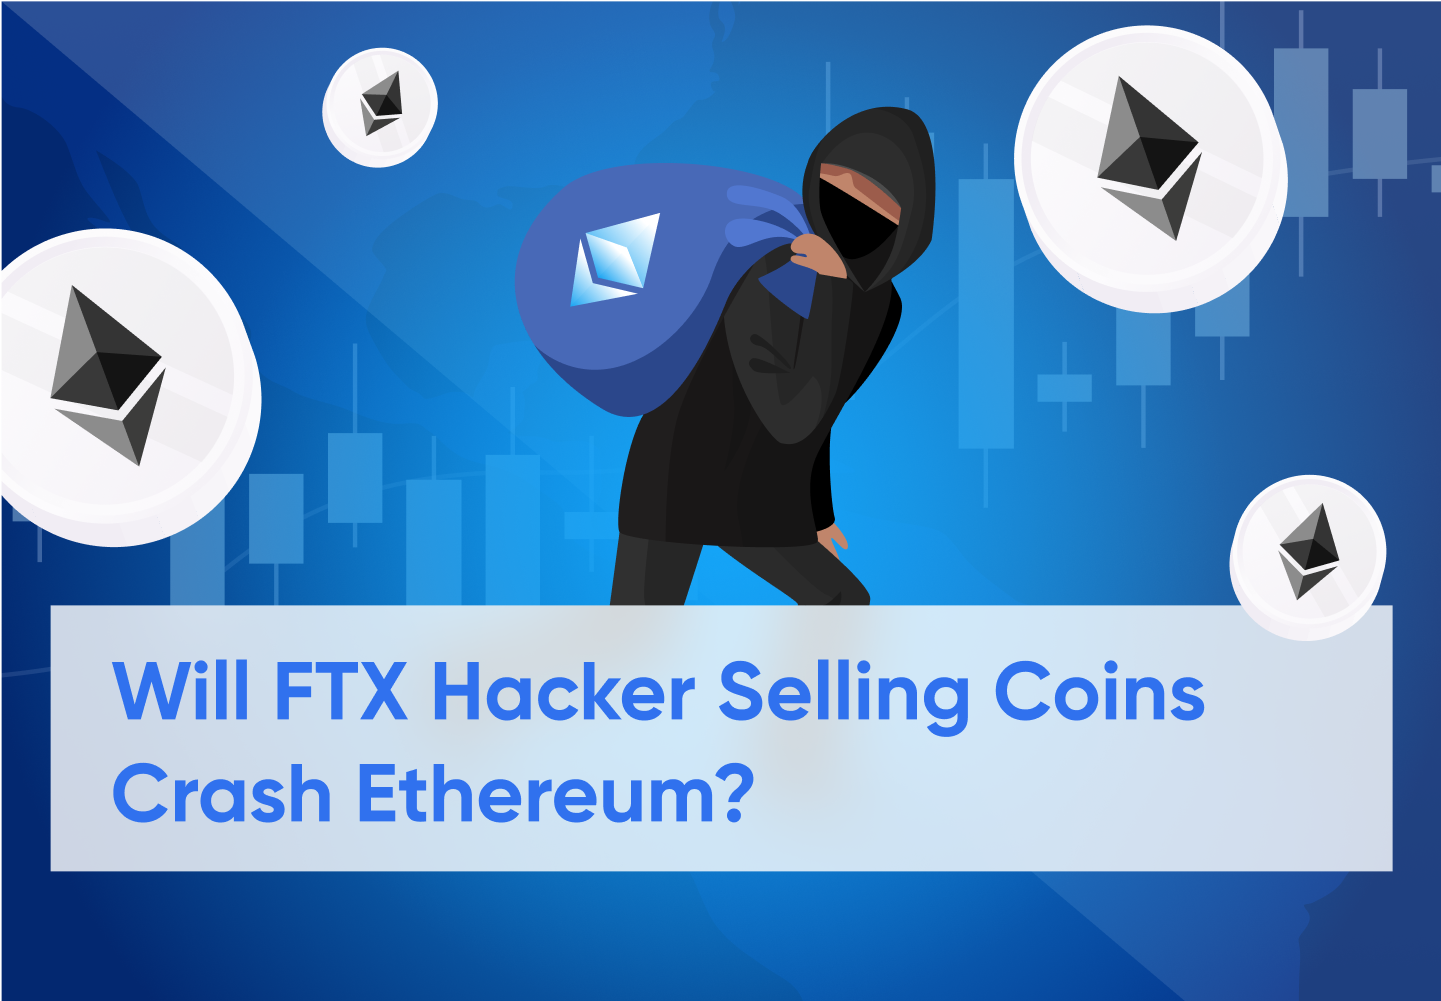 Sale of Stolen Coins by Hacker Could Pressure Ethereum But All is Not Lost